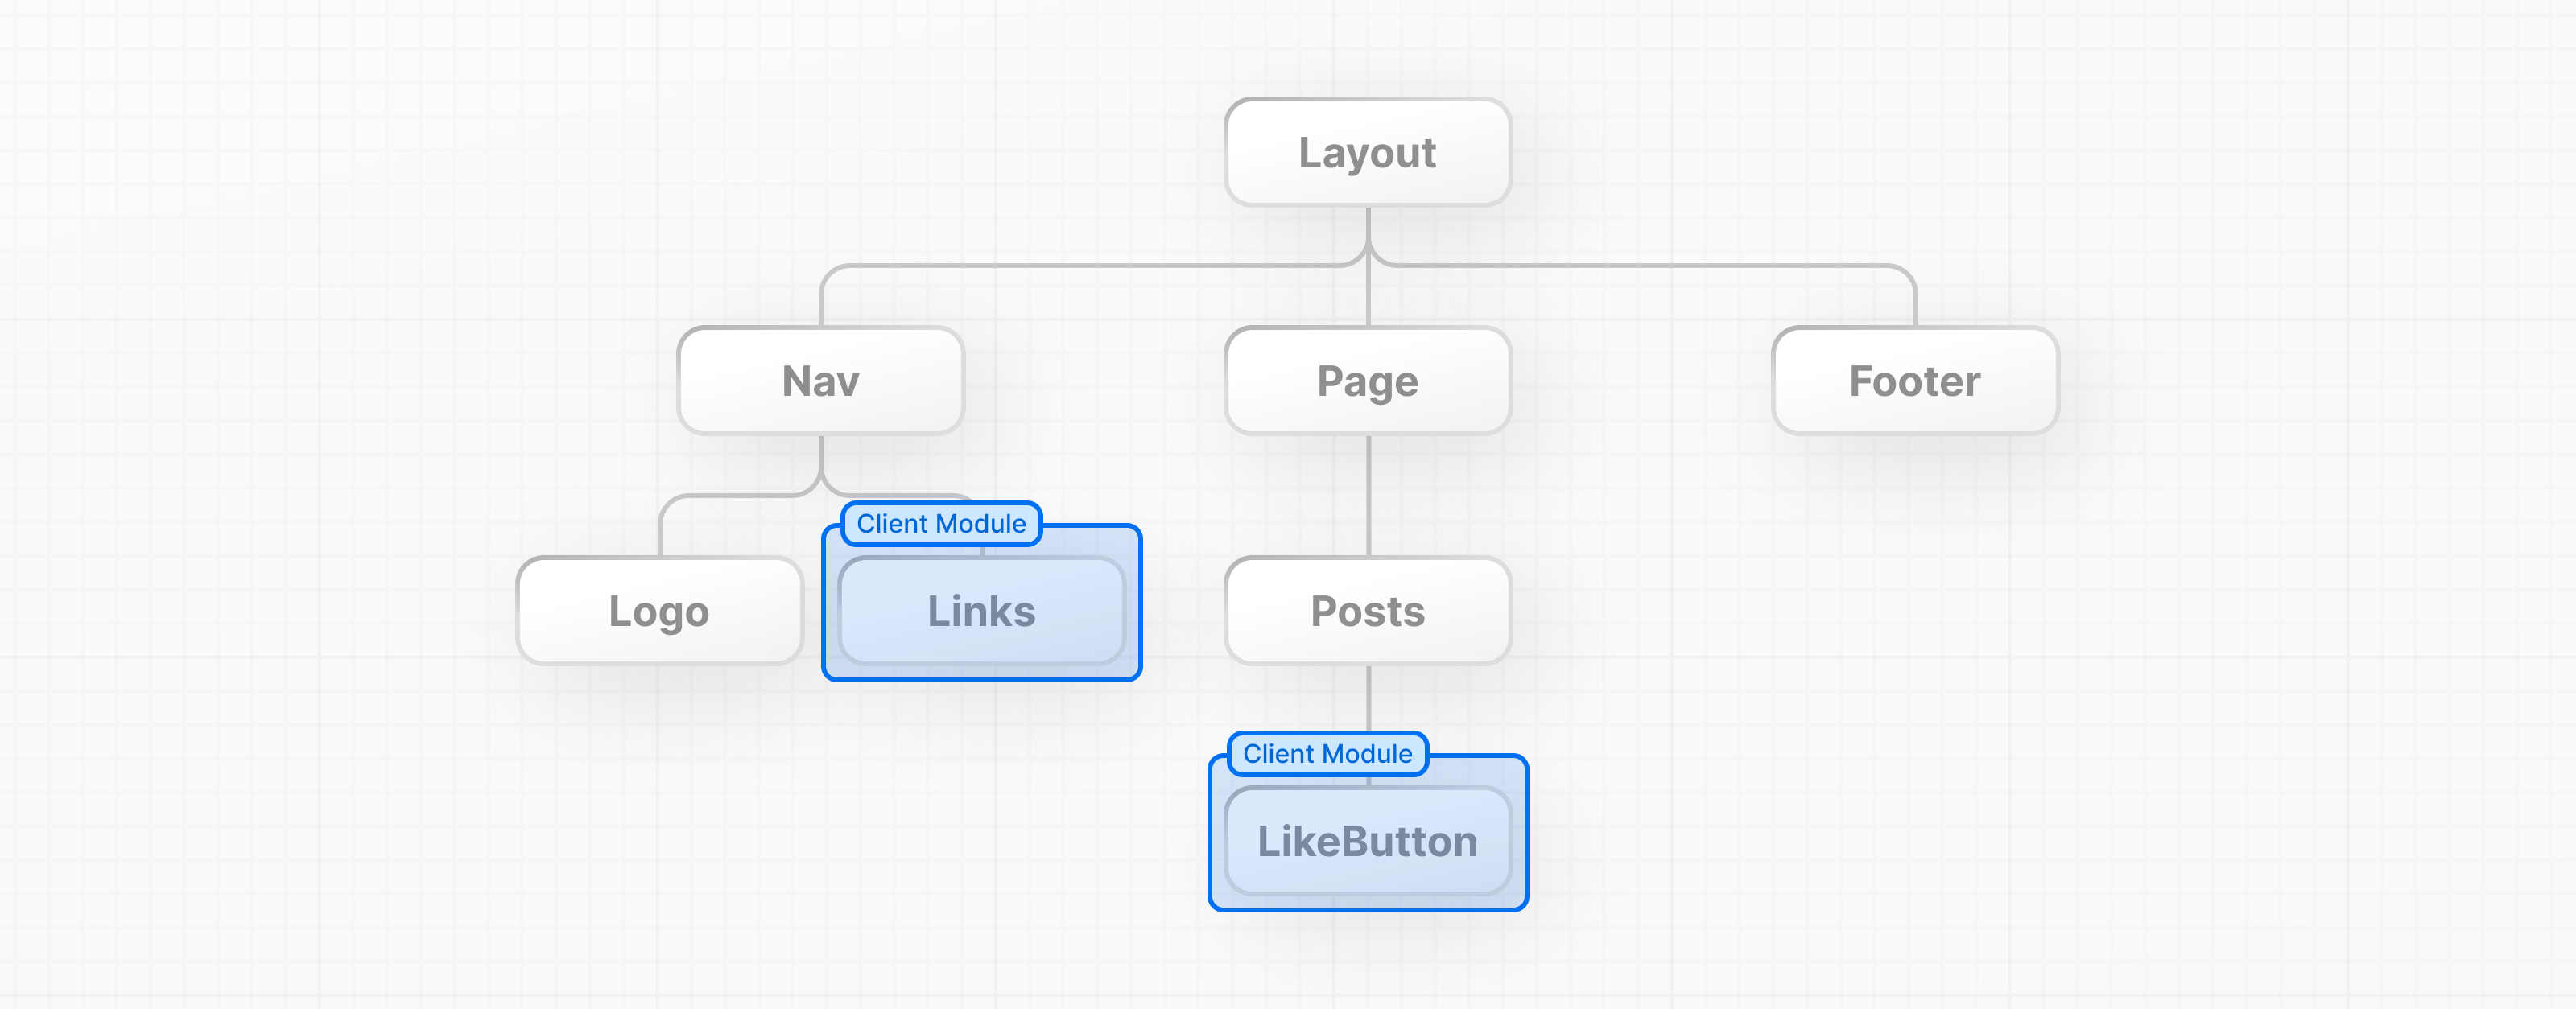 A component tree showing a layout that has 3 components as its children: Nav, Page, and Footer. The page component has 2 children: Posts and LikeButton. The Posts component is rendered on the server, and the LikeButton component is rendered on the client.